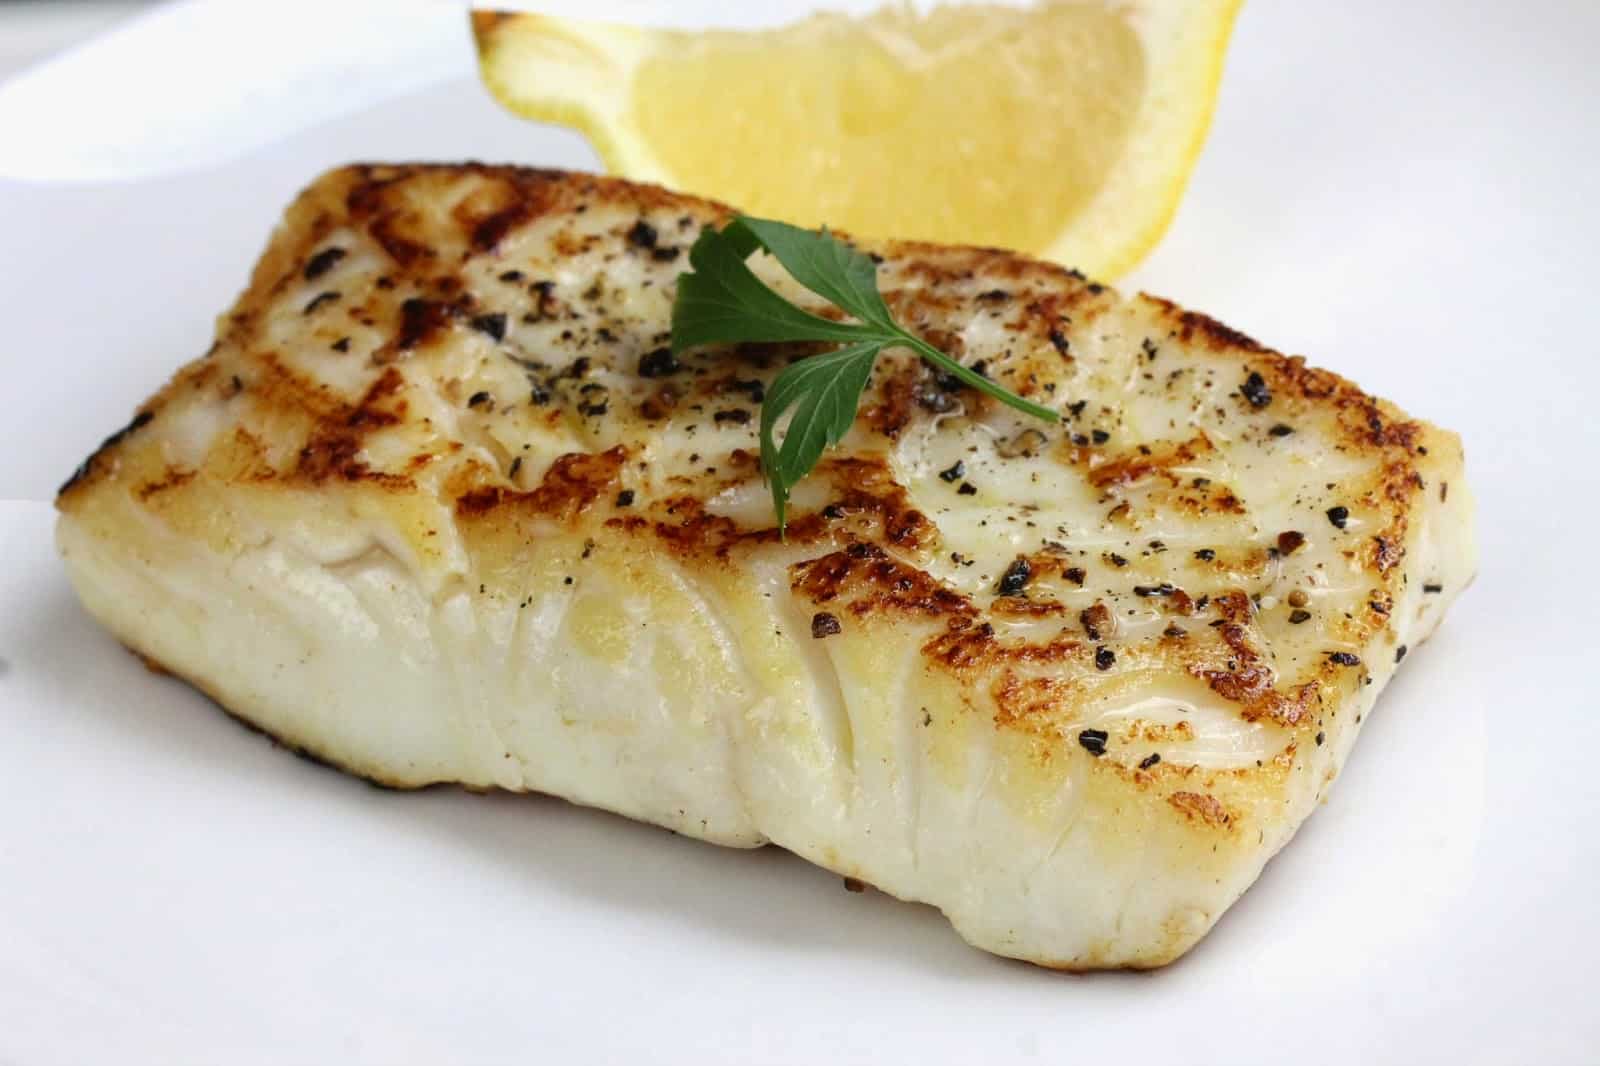 Pan seared fish on a white plate with a lemon wedge by it.